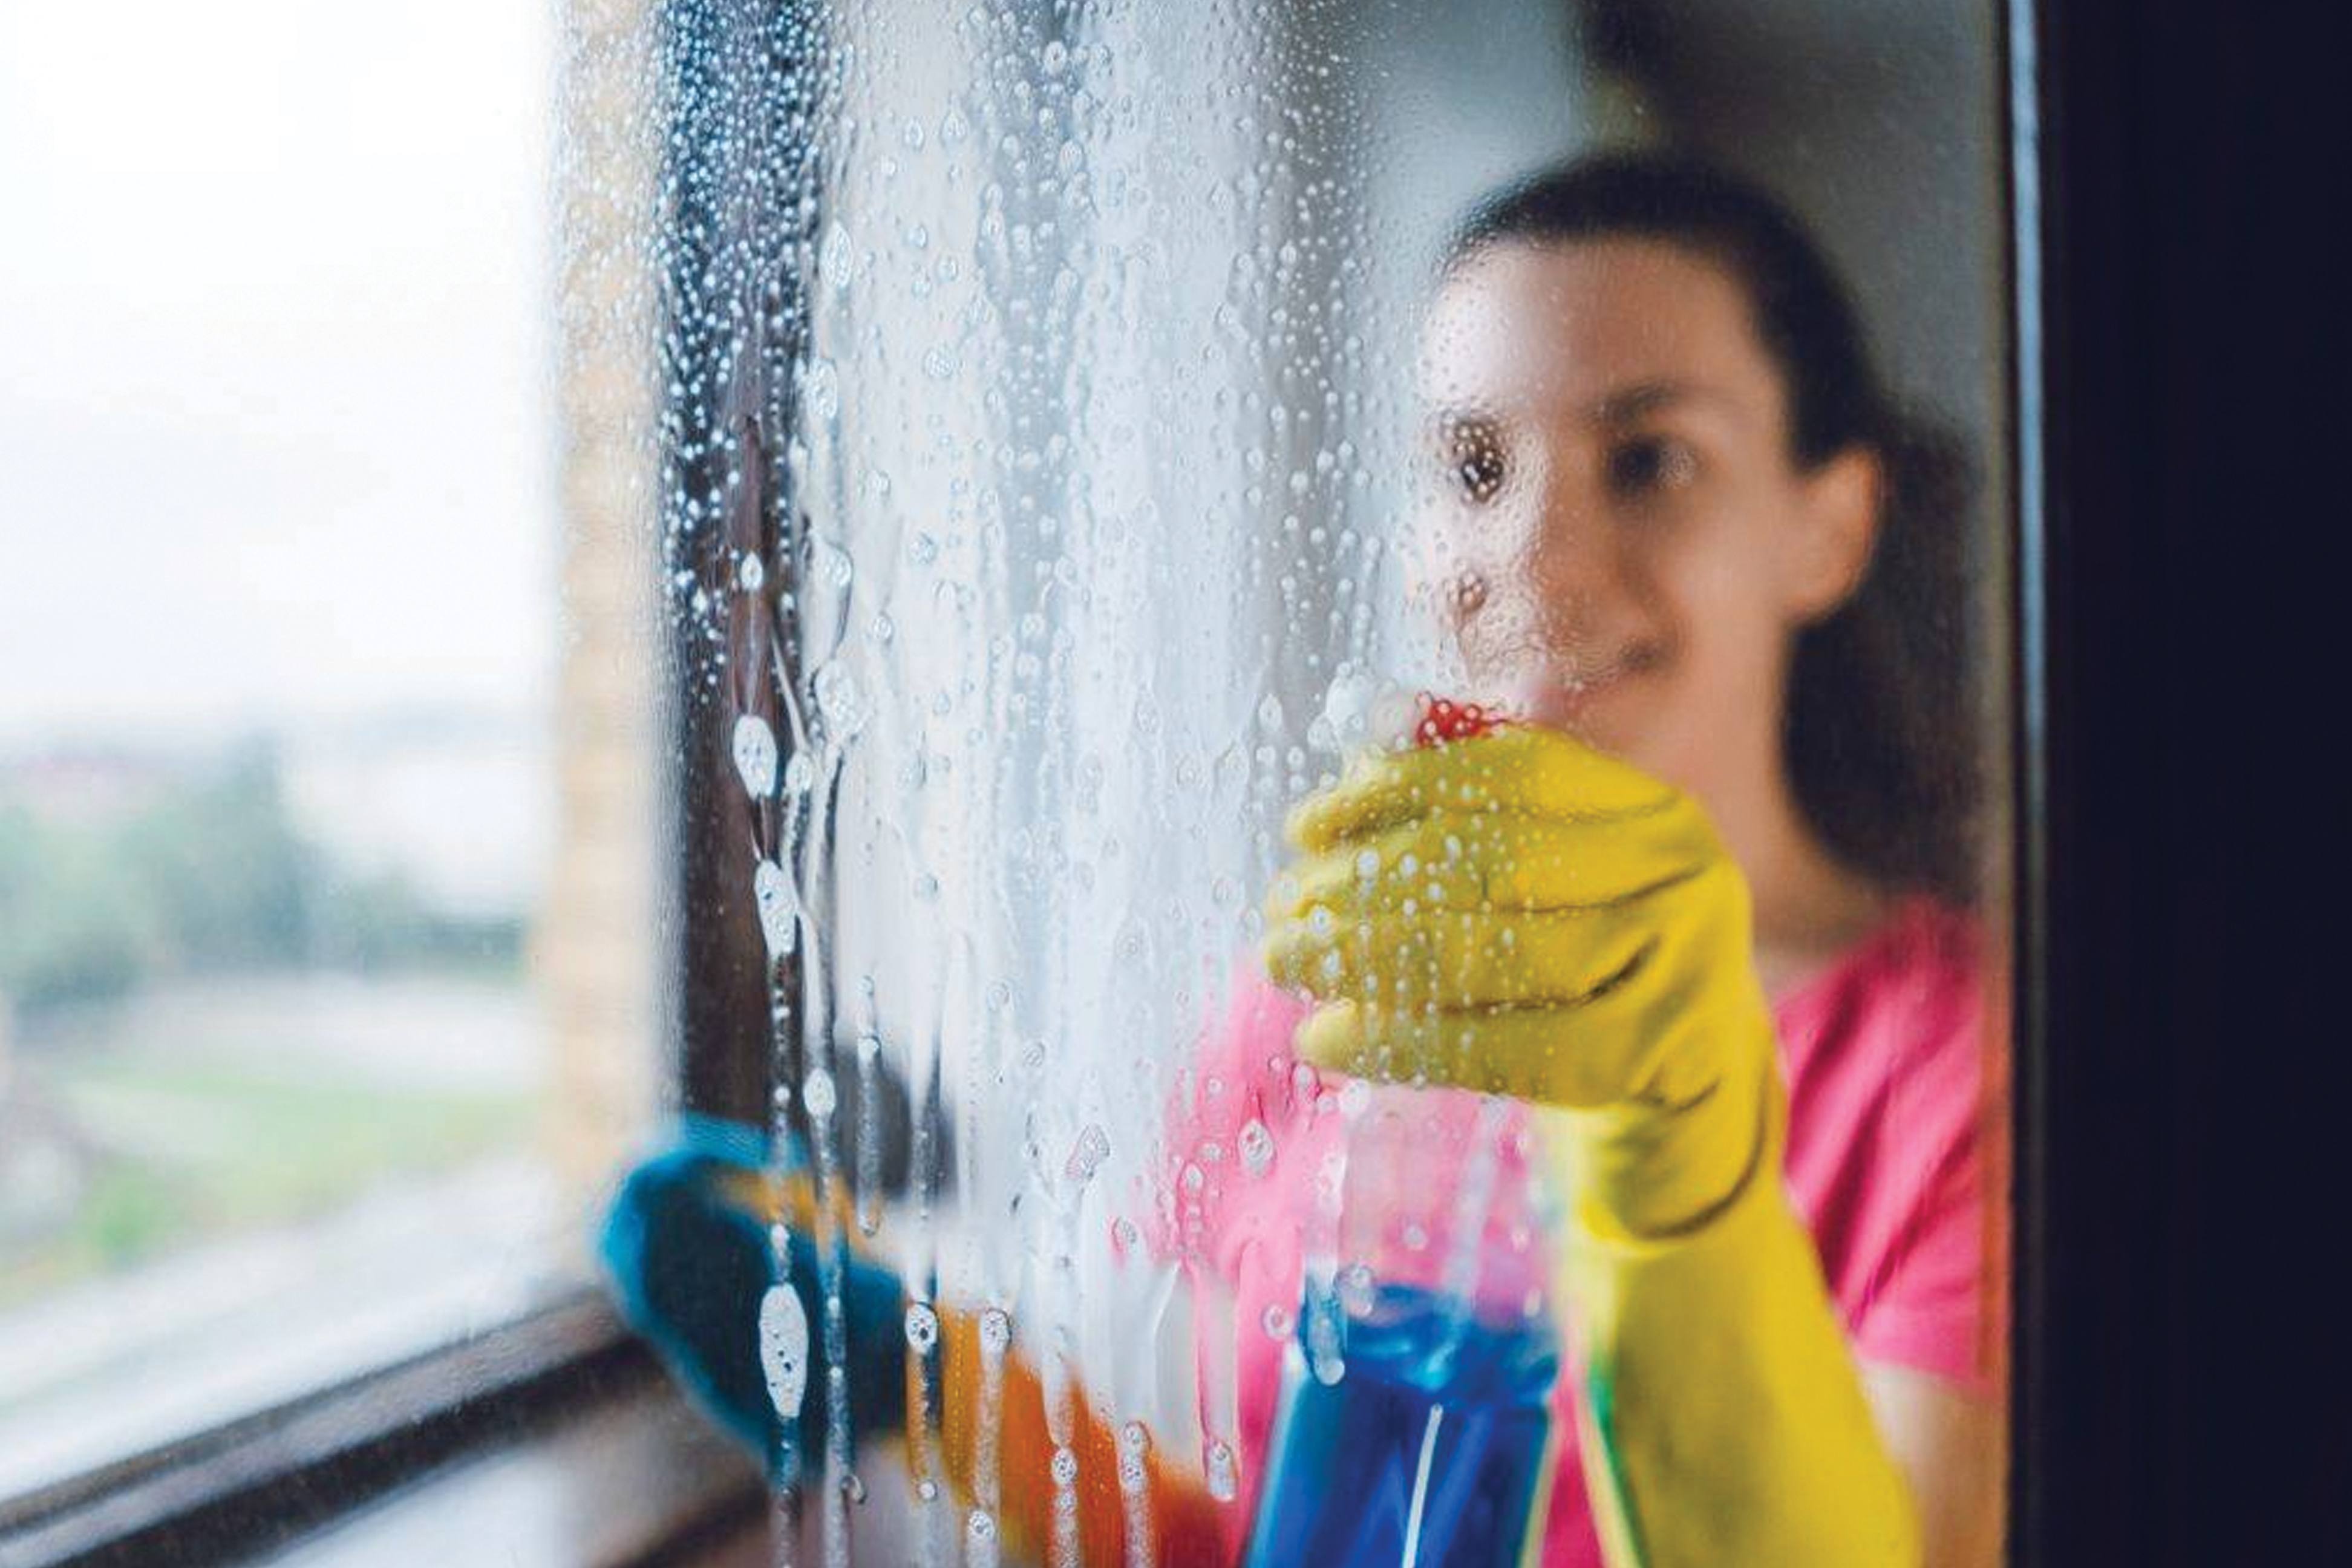 Molly Maid franchise employee cleaning a window